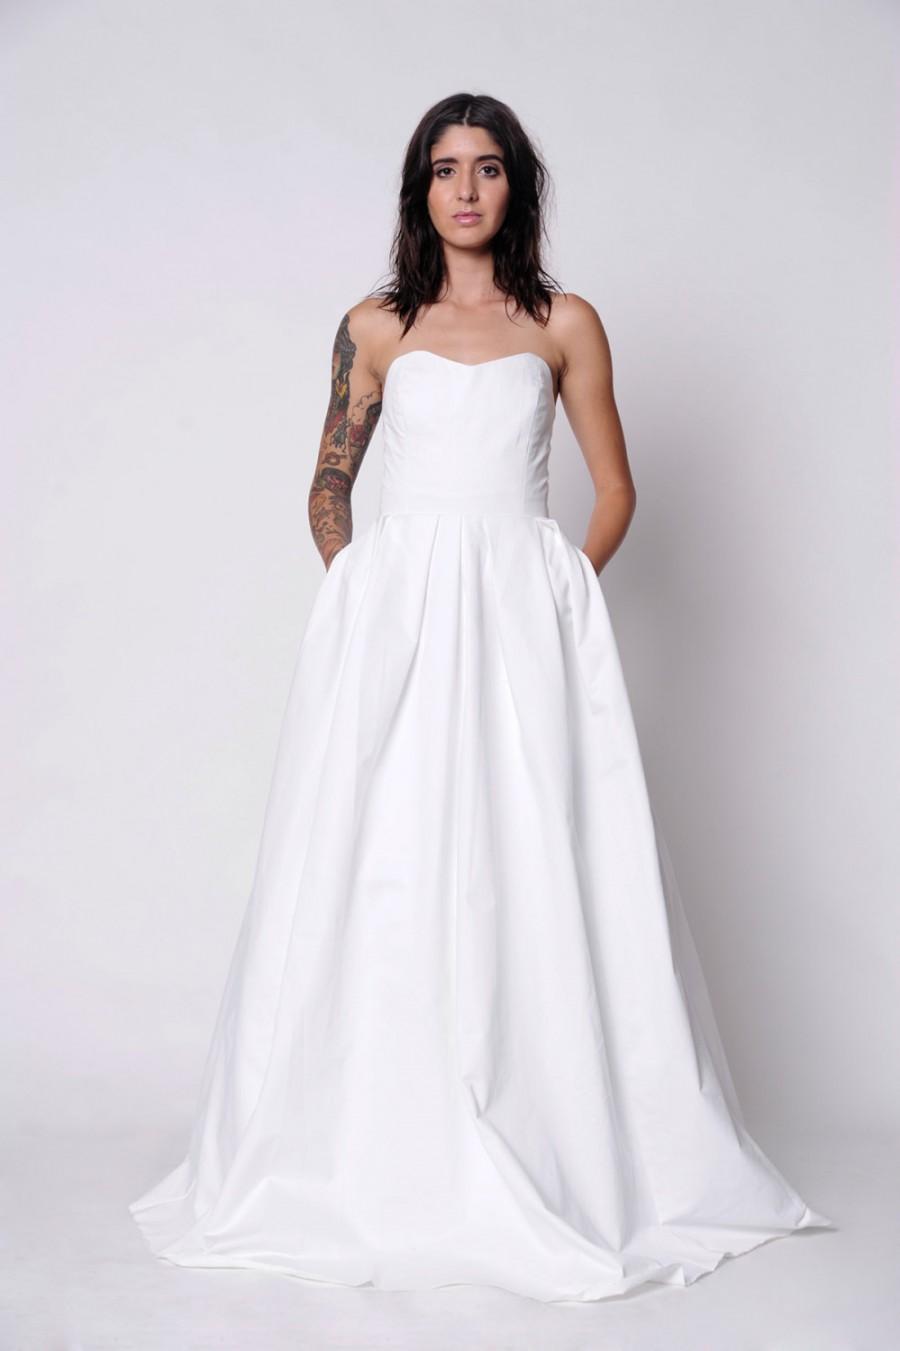 Wedding - Wedding Gown with Pockets. Midnight Skies Wedding Gown. Strapless Gown with Pleated Skirt and Button Detail. Custom Made to Order.